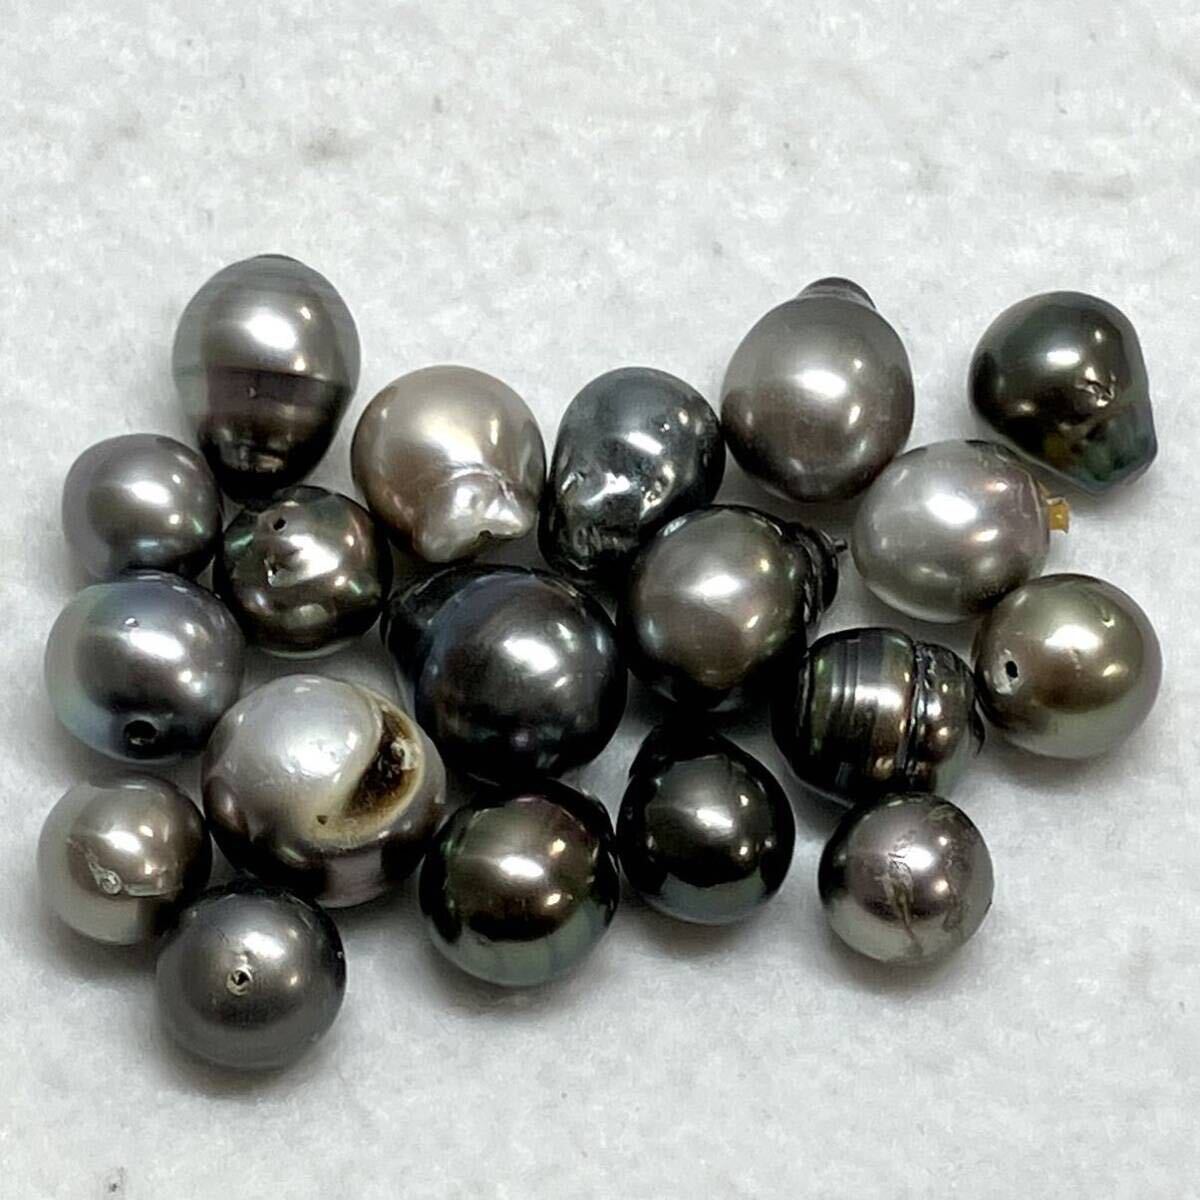 [ south . Black Butterfly pearl 19 point . summarize ]M weight approximately 50.0g approximately 250ct 10.5-17.5mm.pearl pearl loose unset jewel gem jewelry jewelry DI0 ①*